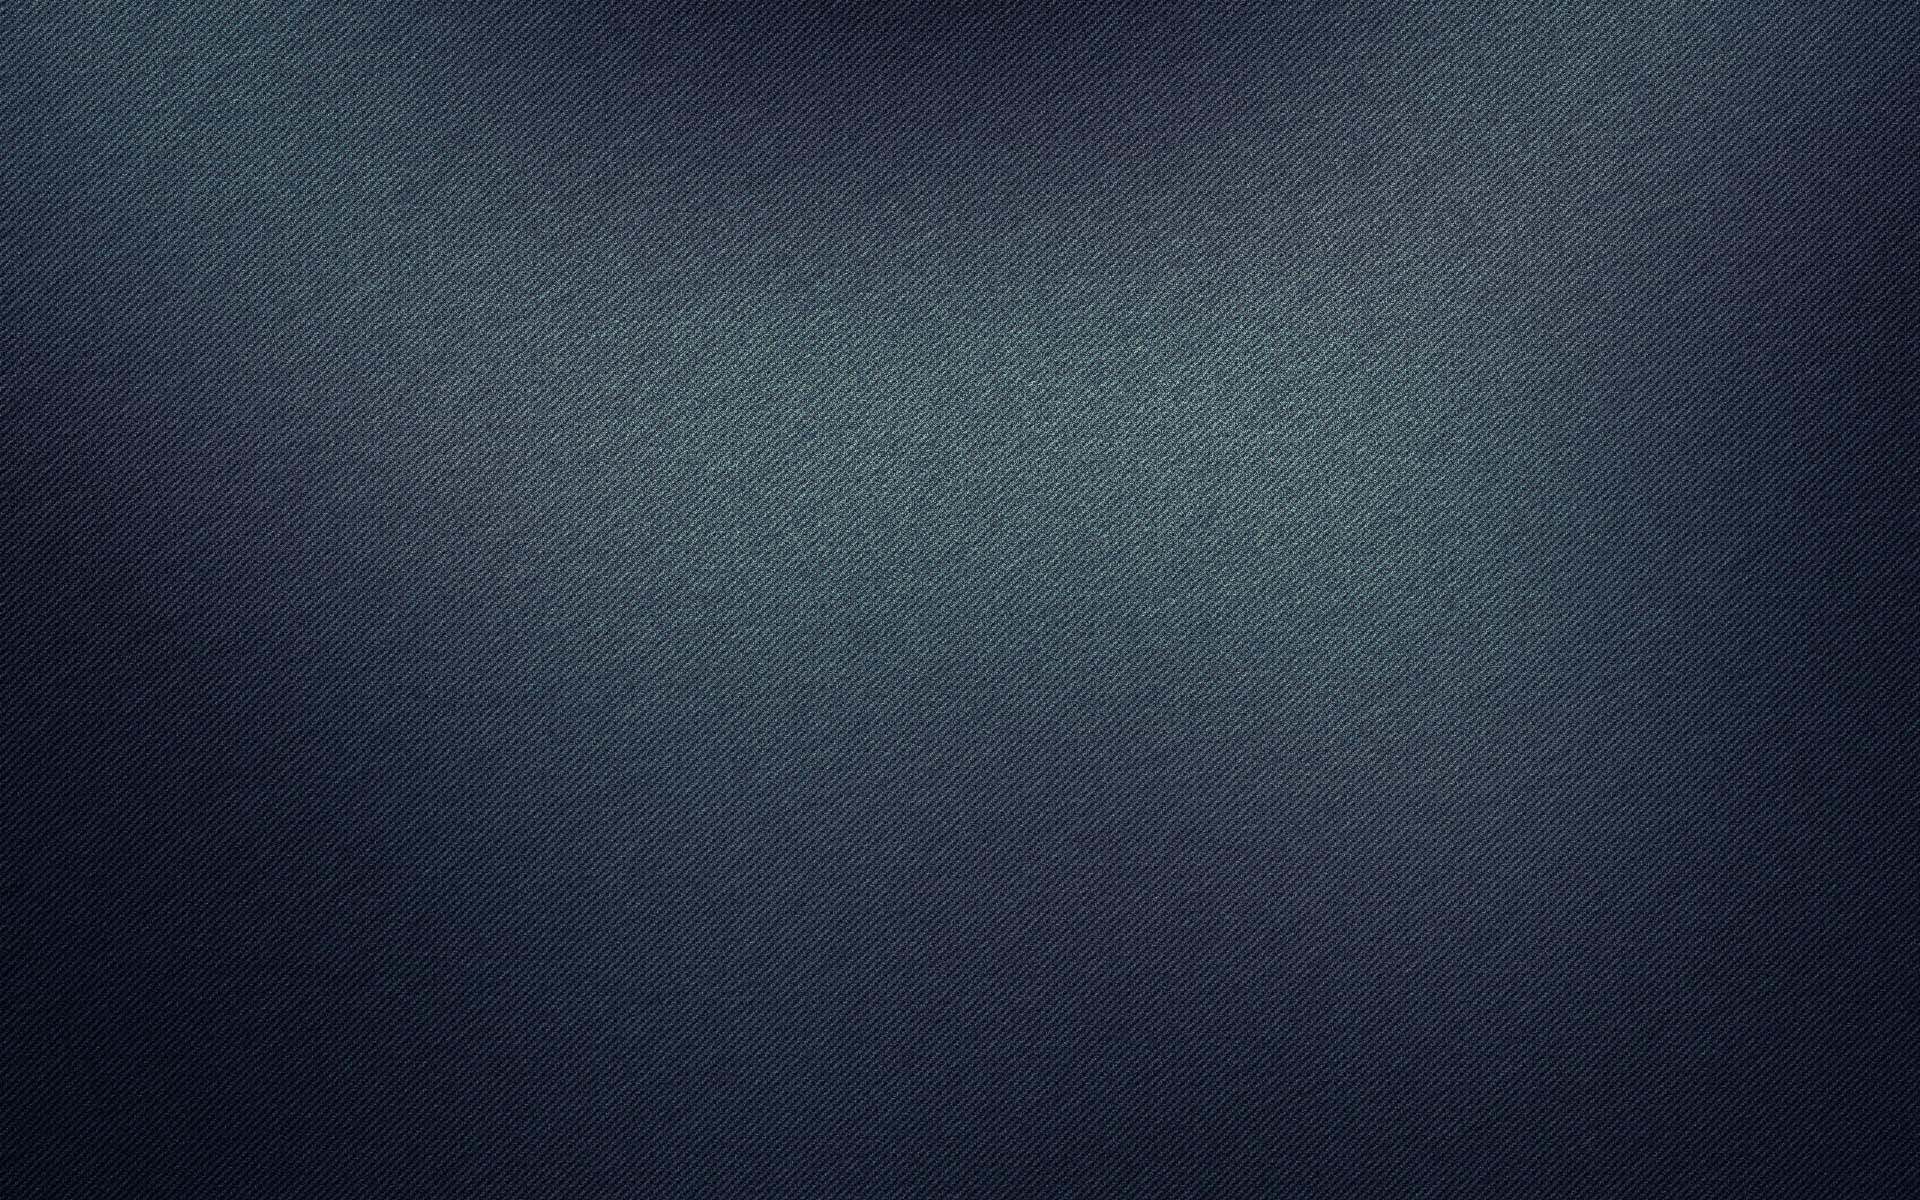 Hd texture backgrounds